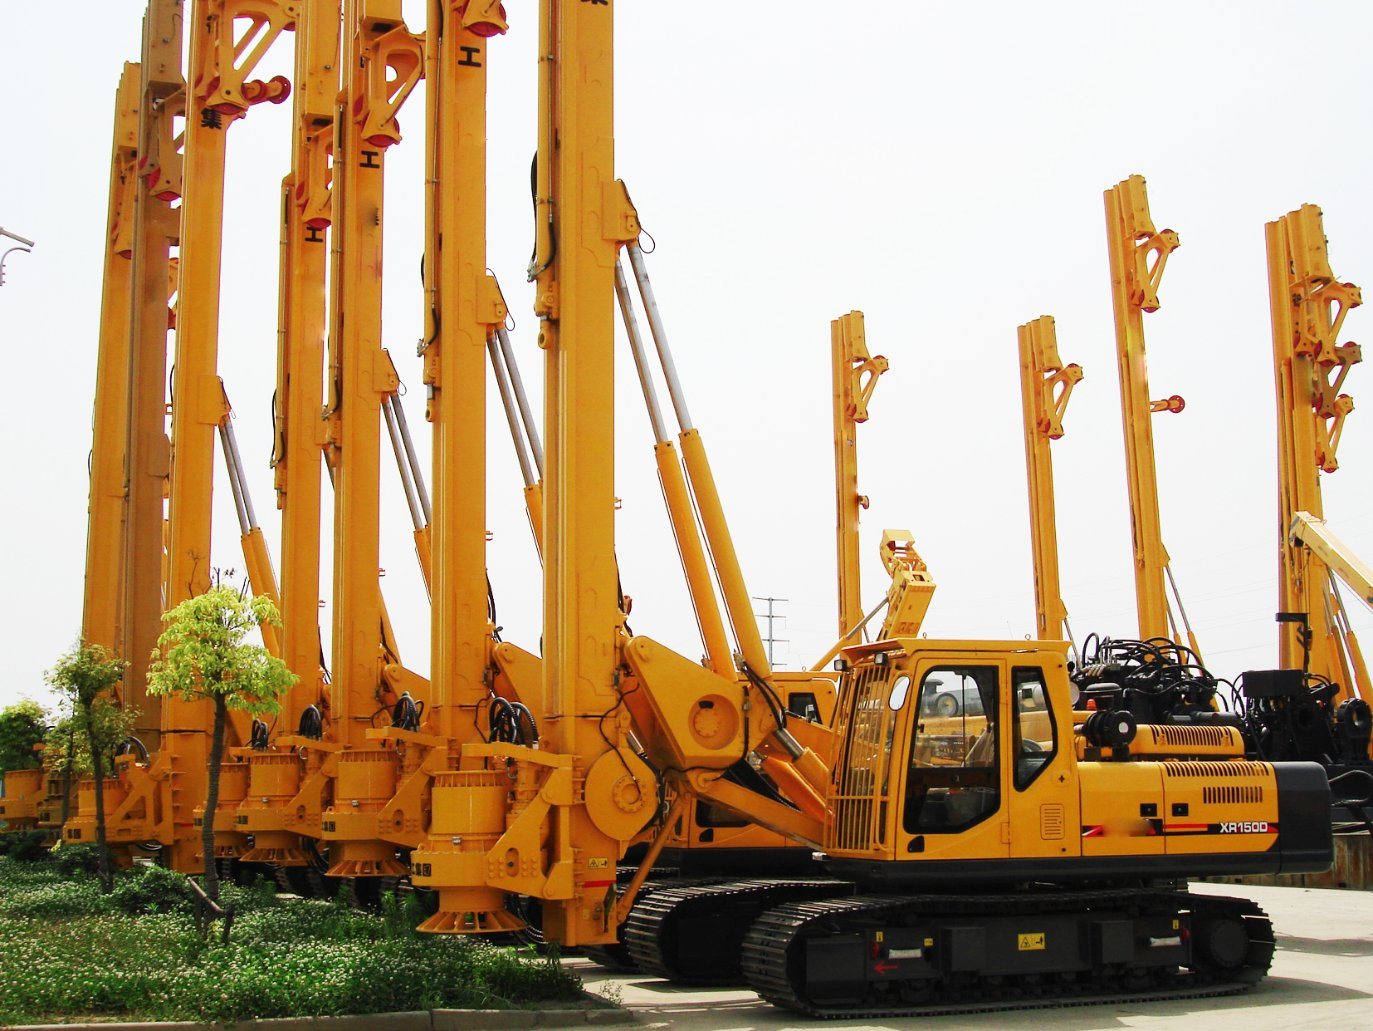 Construction Drilling Machine Rotary Drilling Rig 150kn. M Xr150d with Diesel Engine